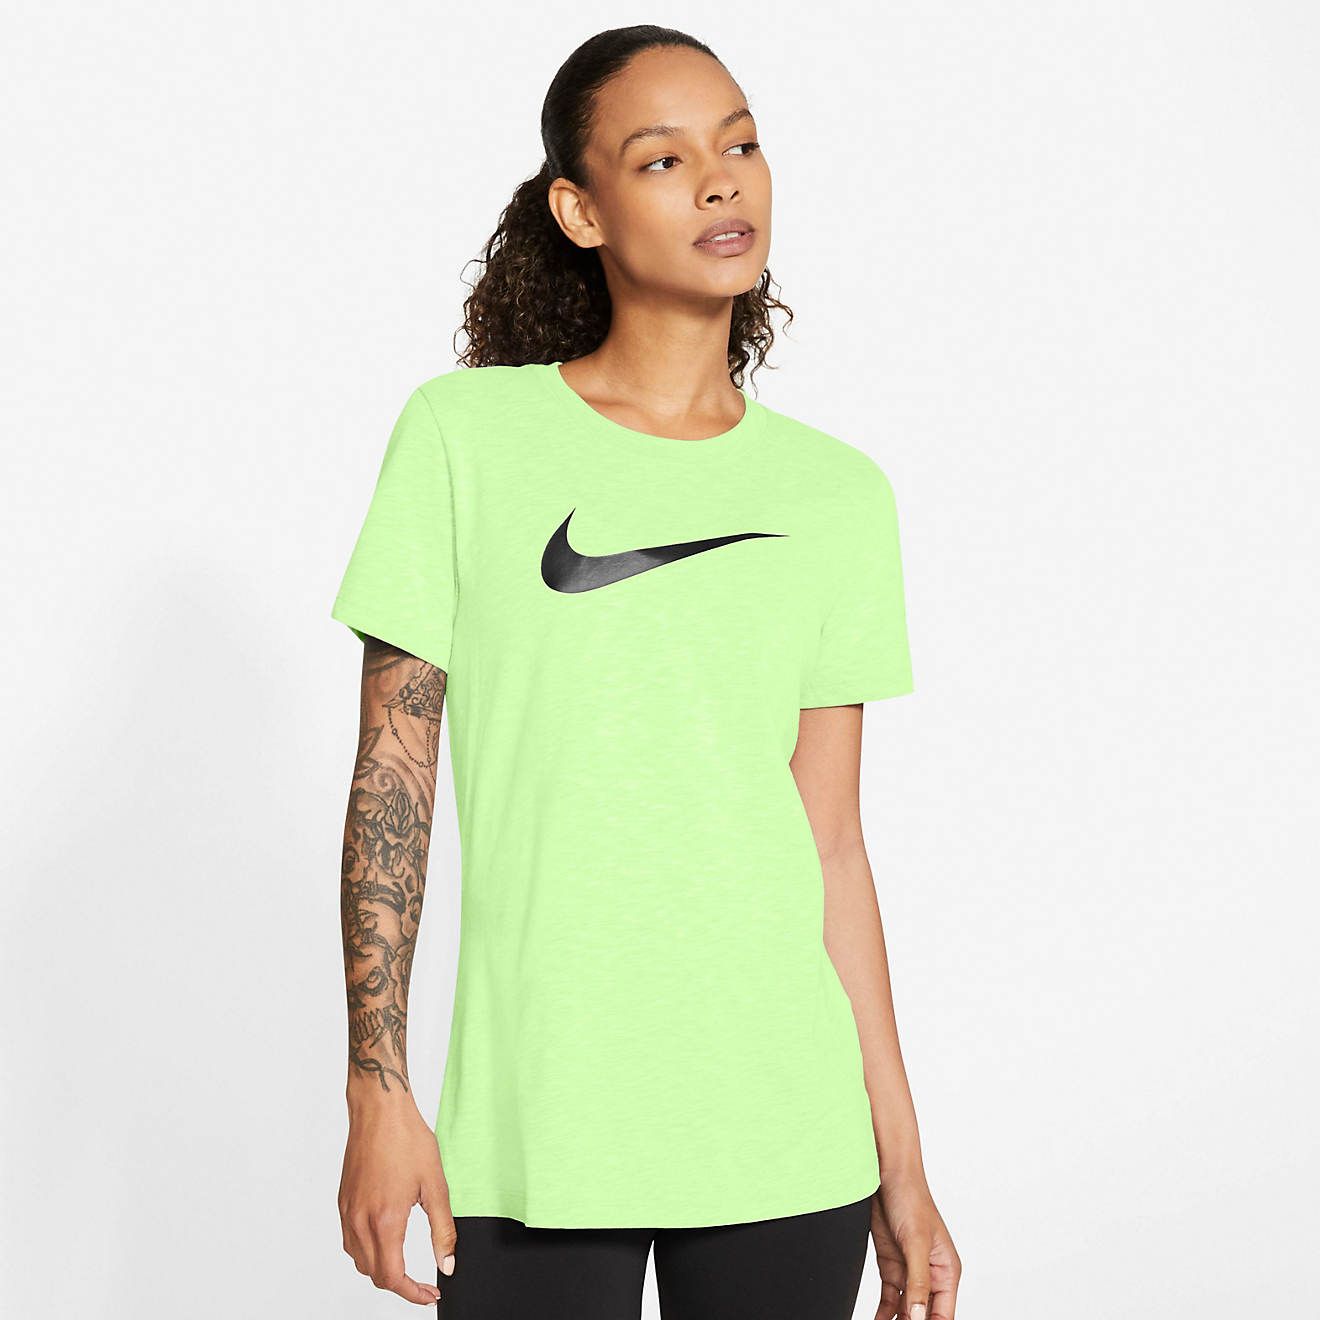 Nike Women's Dry Training Crew T-shirt | Academy Sports + Outdoor Affiliate